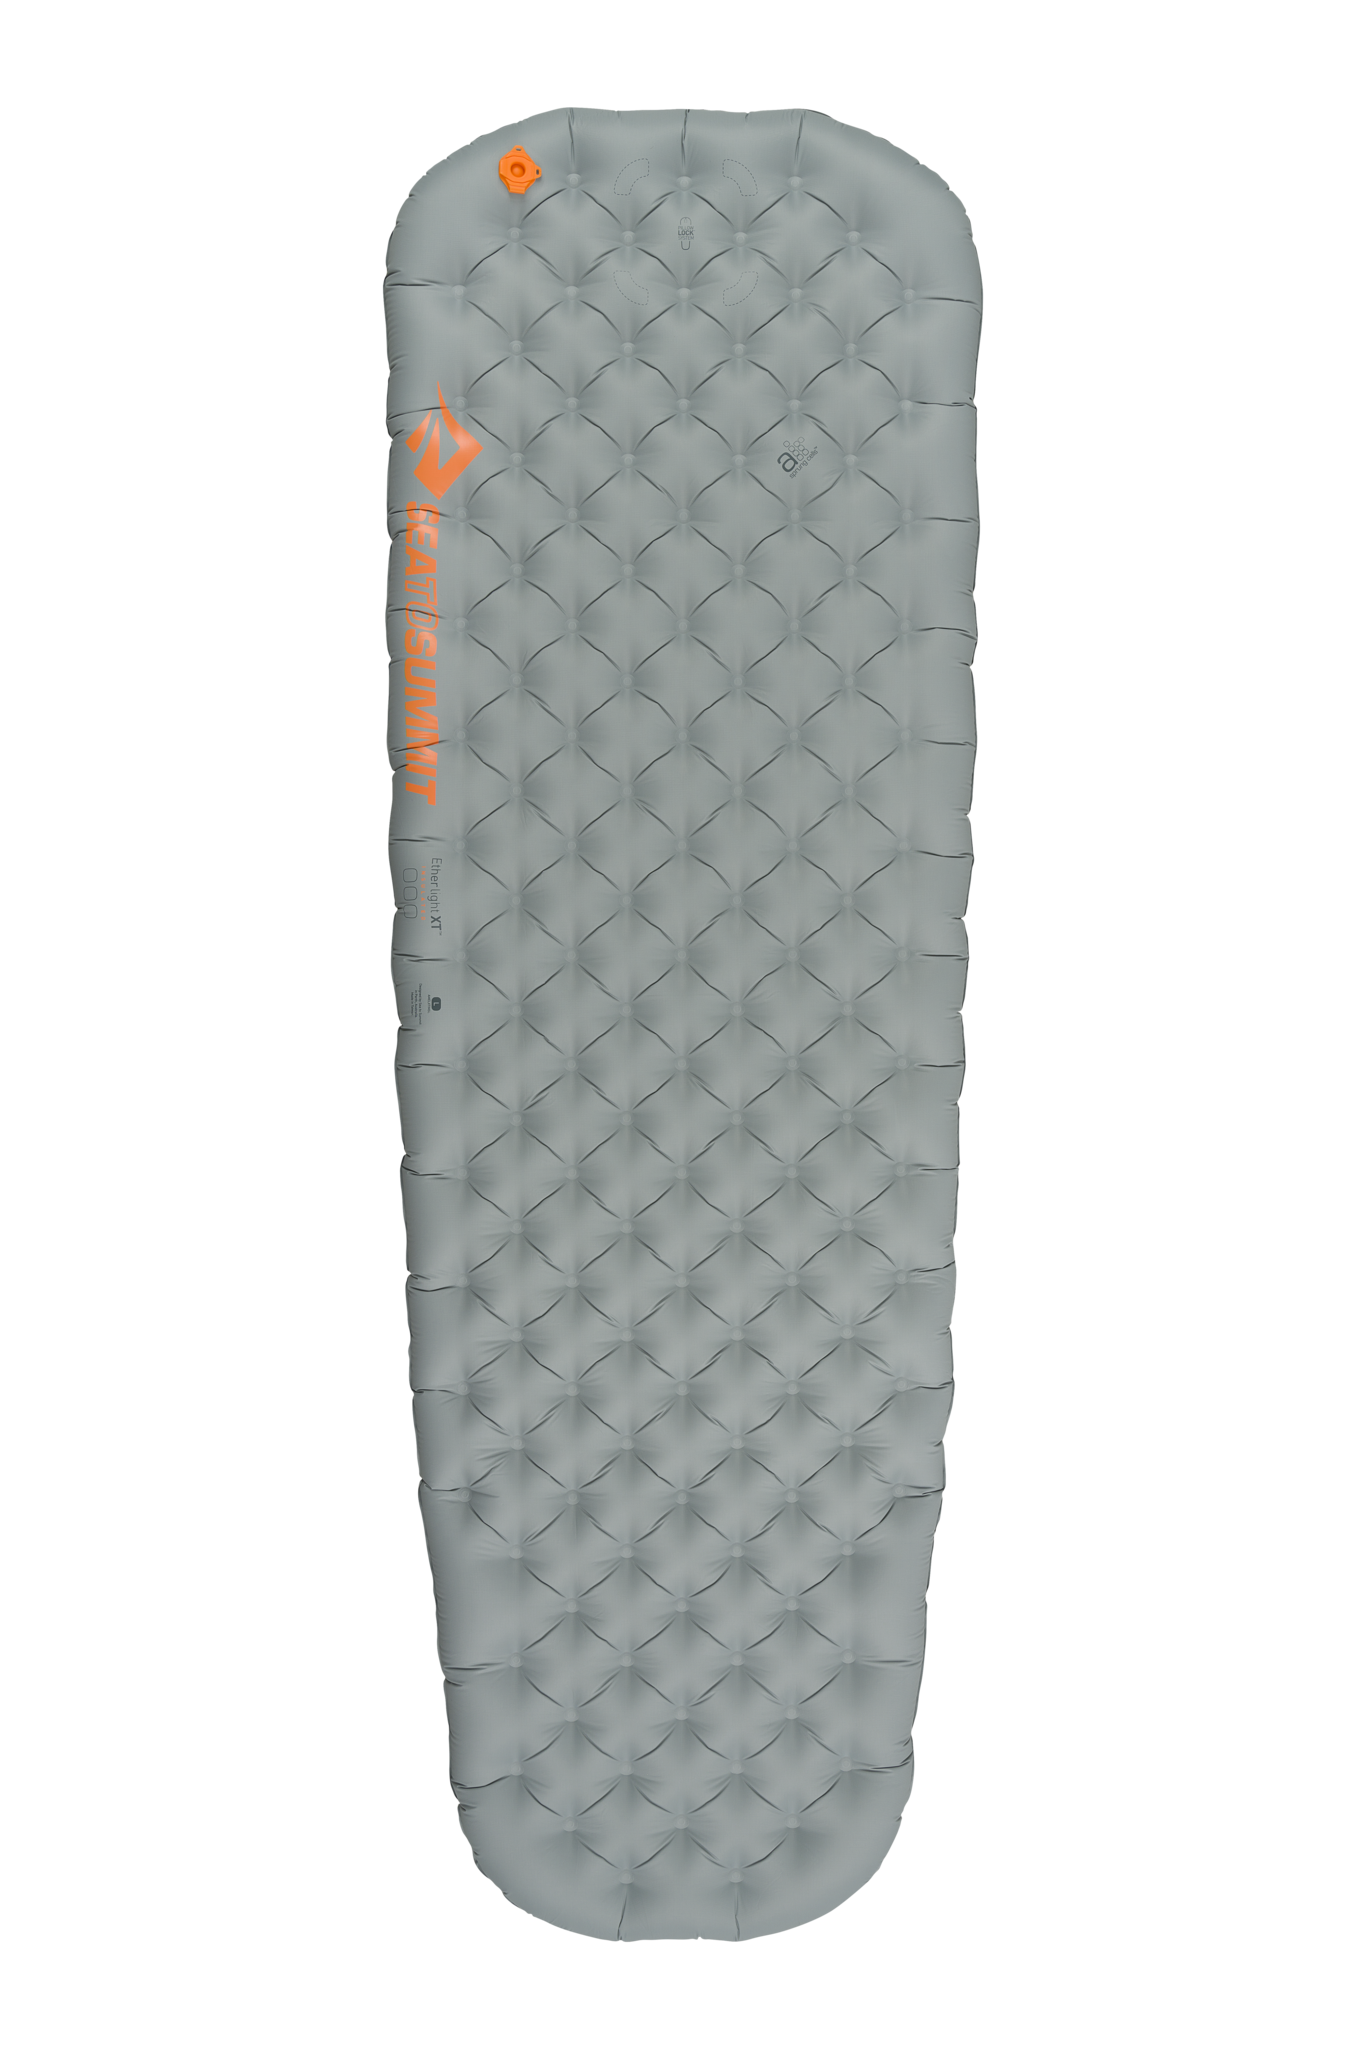 Sea to Summit Ether Light XT Insulated Air Mat Large smoke